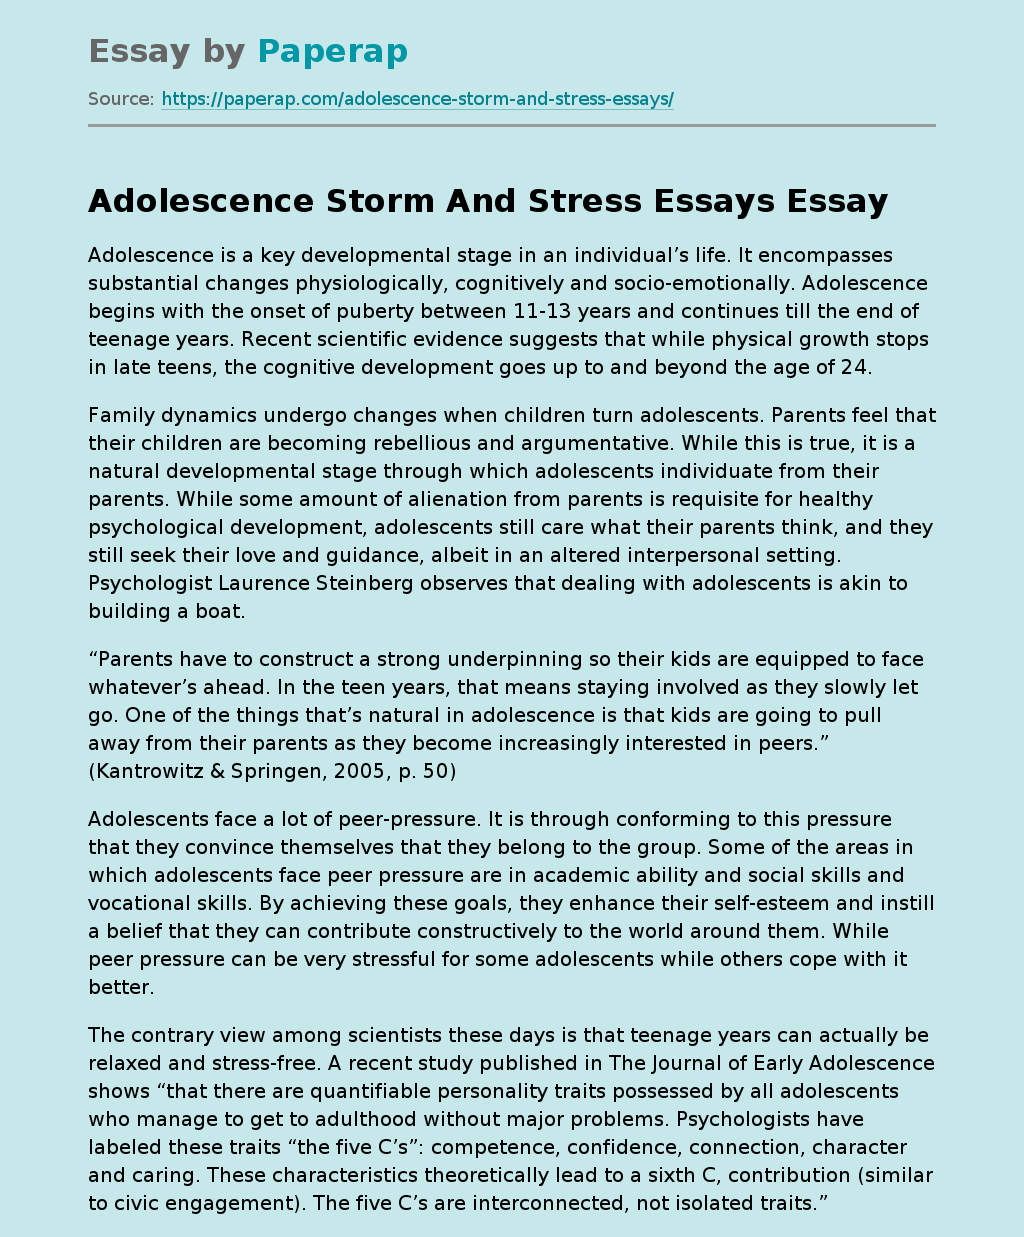 Adolescence Storm And Stress Essays